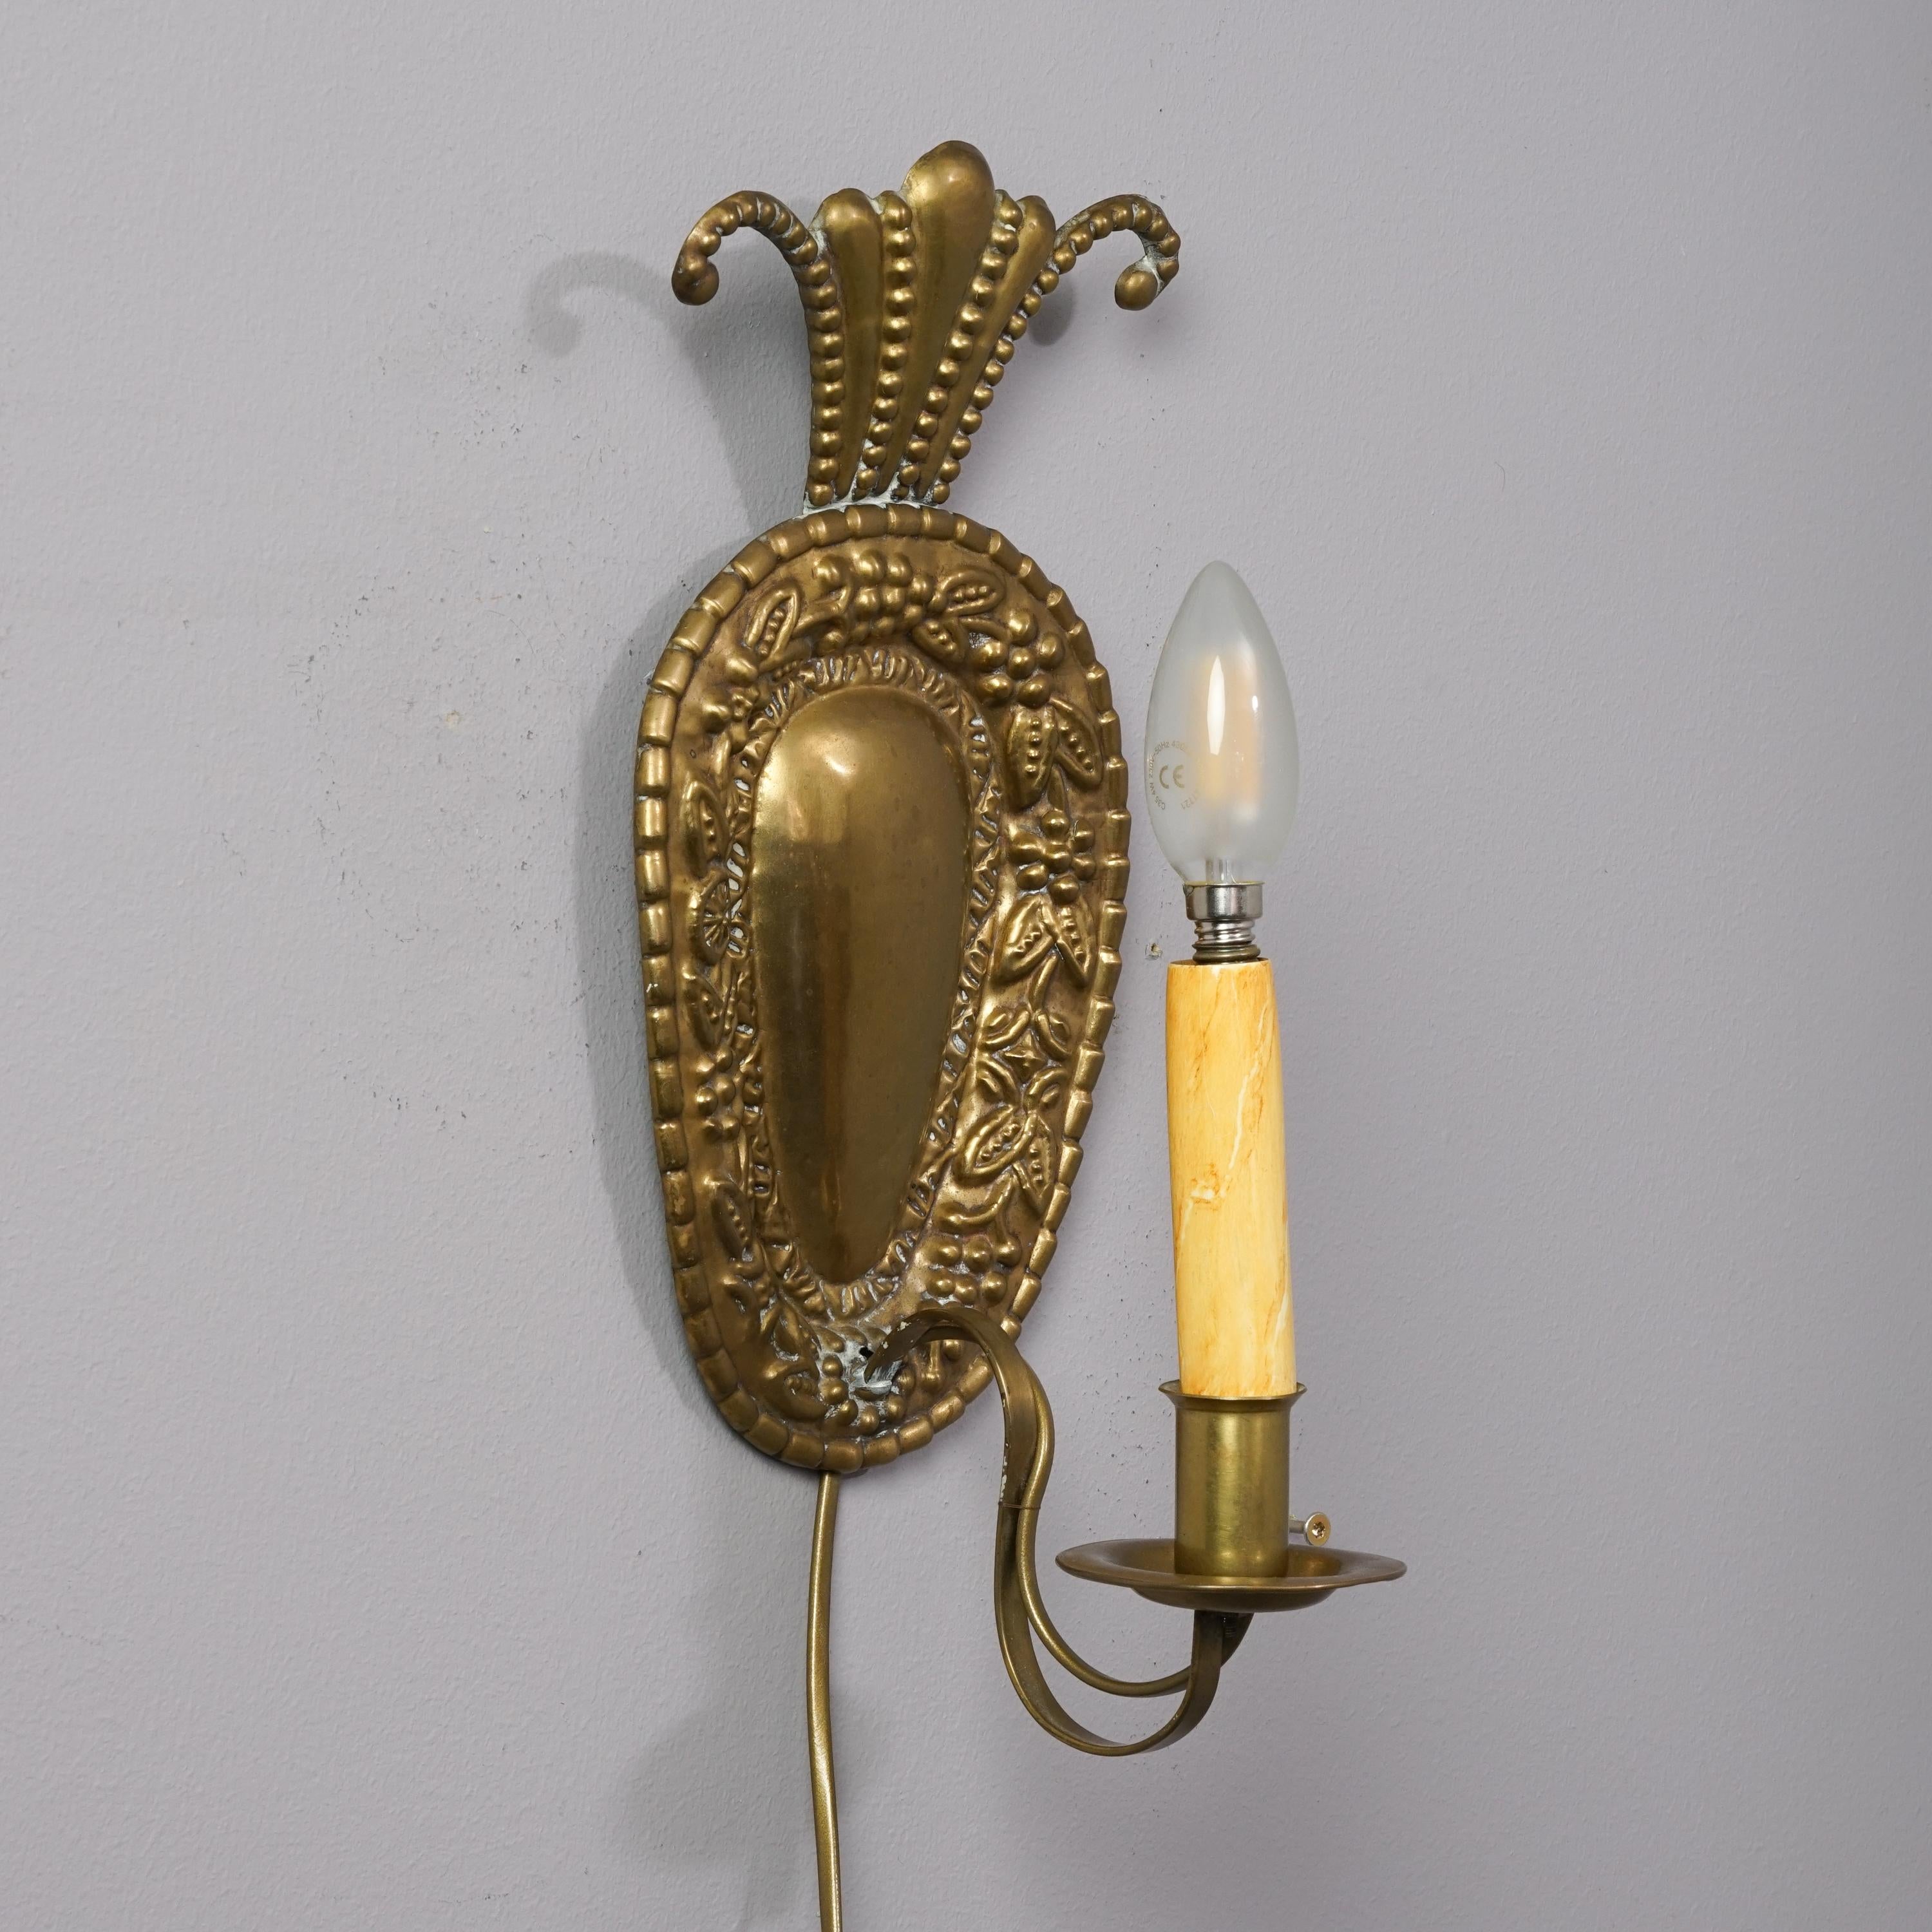 Rare Paavo Tynell Art Deco wall sconce for Taito Oy from the 1920s/1930s. Brass. Good vintage condition, minor wear consistent with age and use.